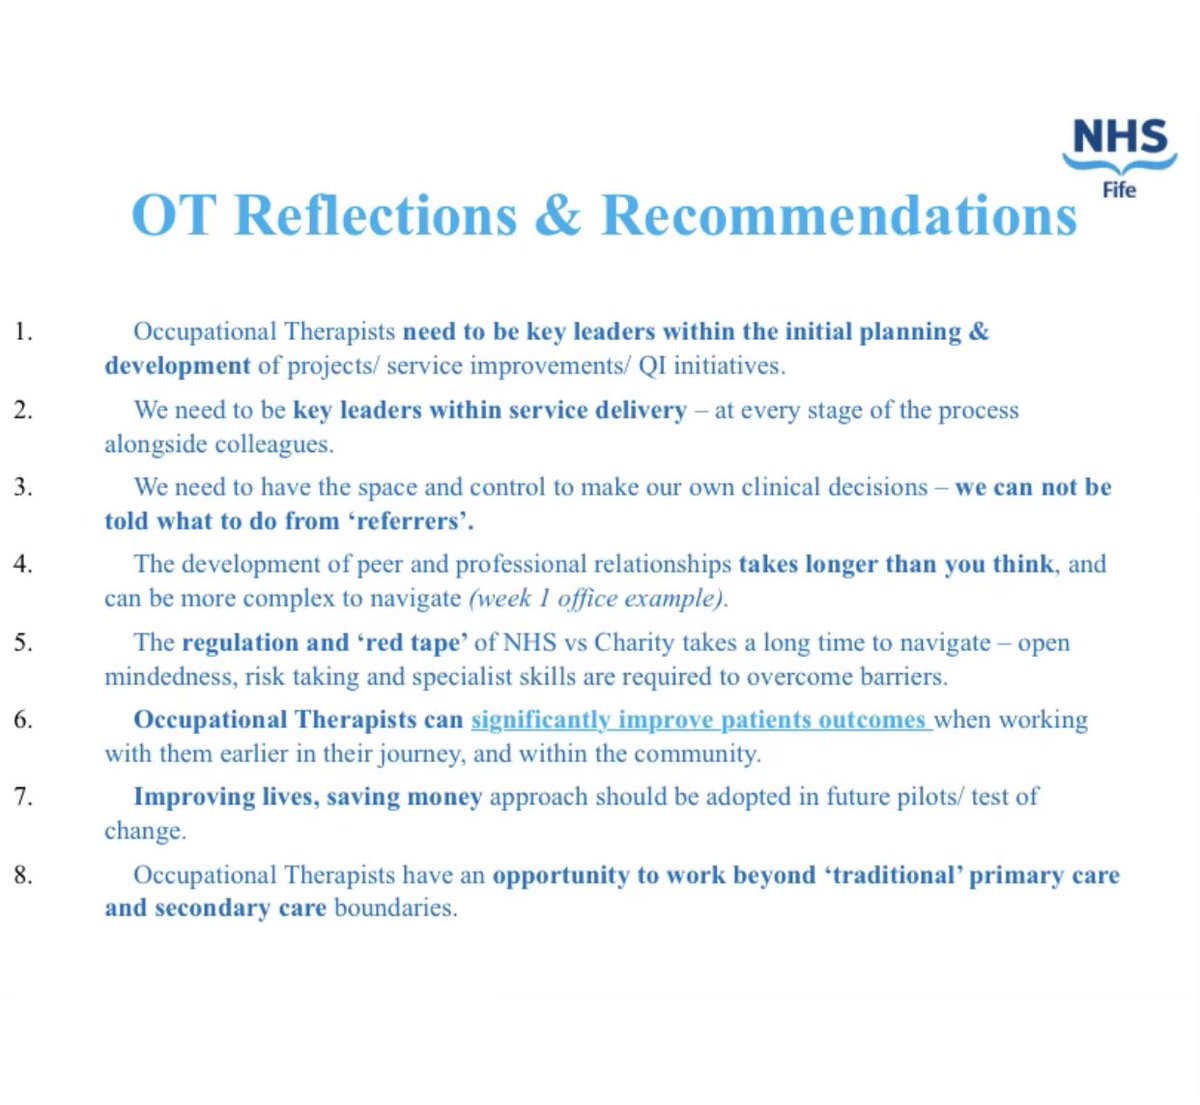 Some of my top slides from the @RCOT_MH conference in London = why primary care? Why not 3rd sector/ heart of the community?…positive external project evaluation… NHS OT report in addition to this..several OT reflections & recommendations. Key message: Occupational Therapists